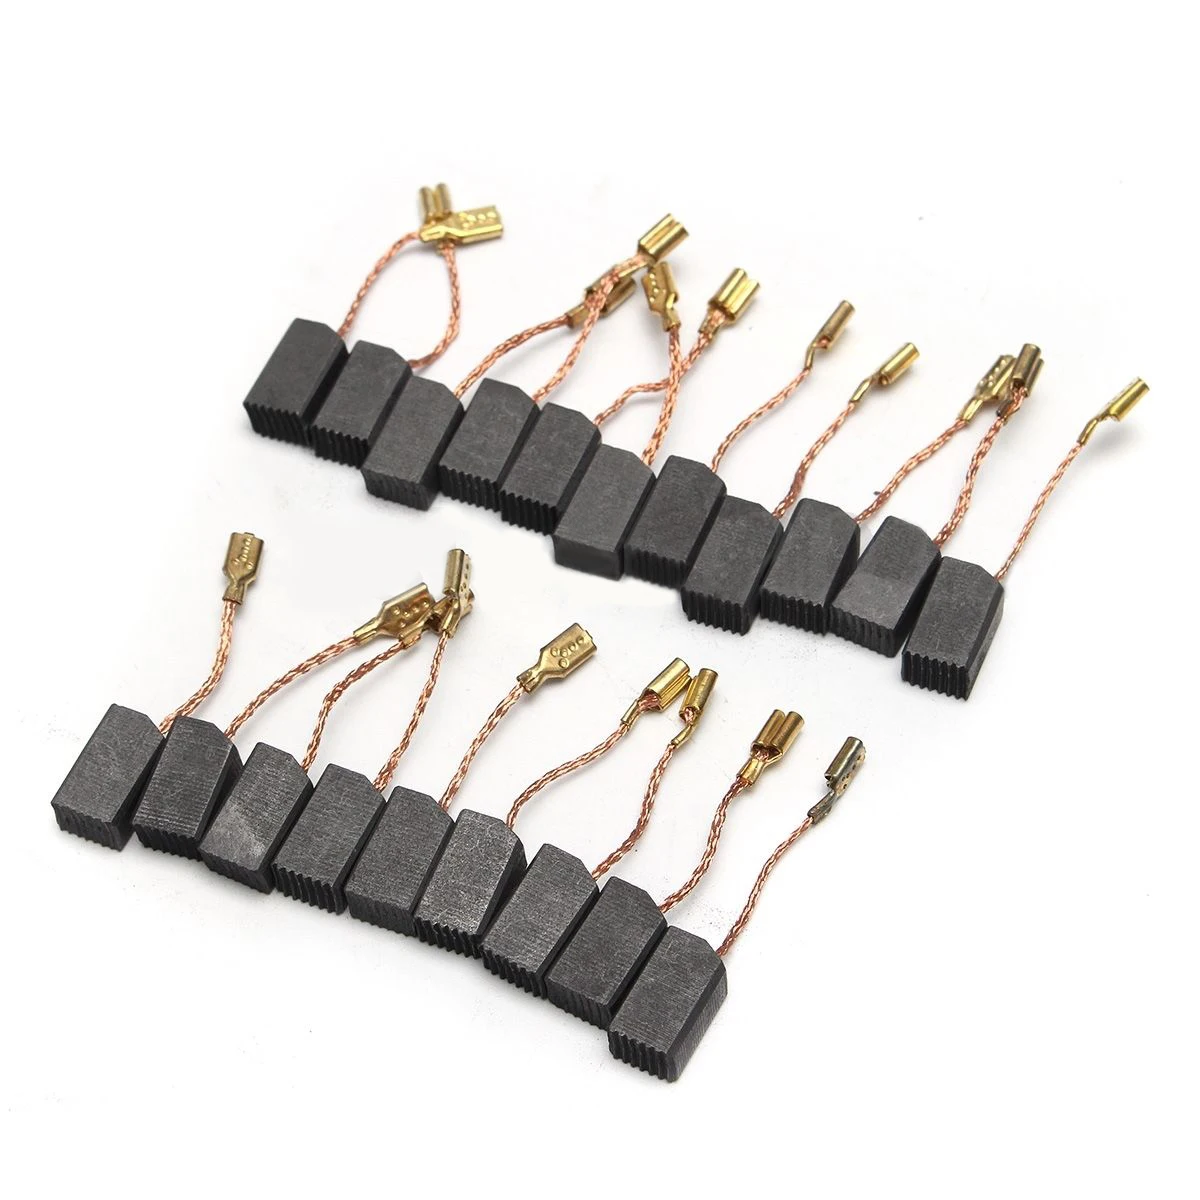 20pcs Mayitr Graphite Copper Motor Carbon Brushes Set Tight Copper Wire for Electric Hammer/Drill Angle Grinder 6mm*8mm*14mm